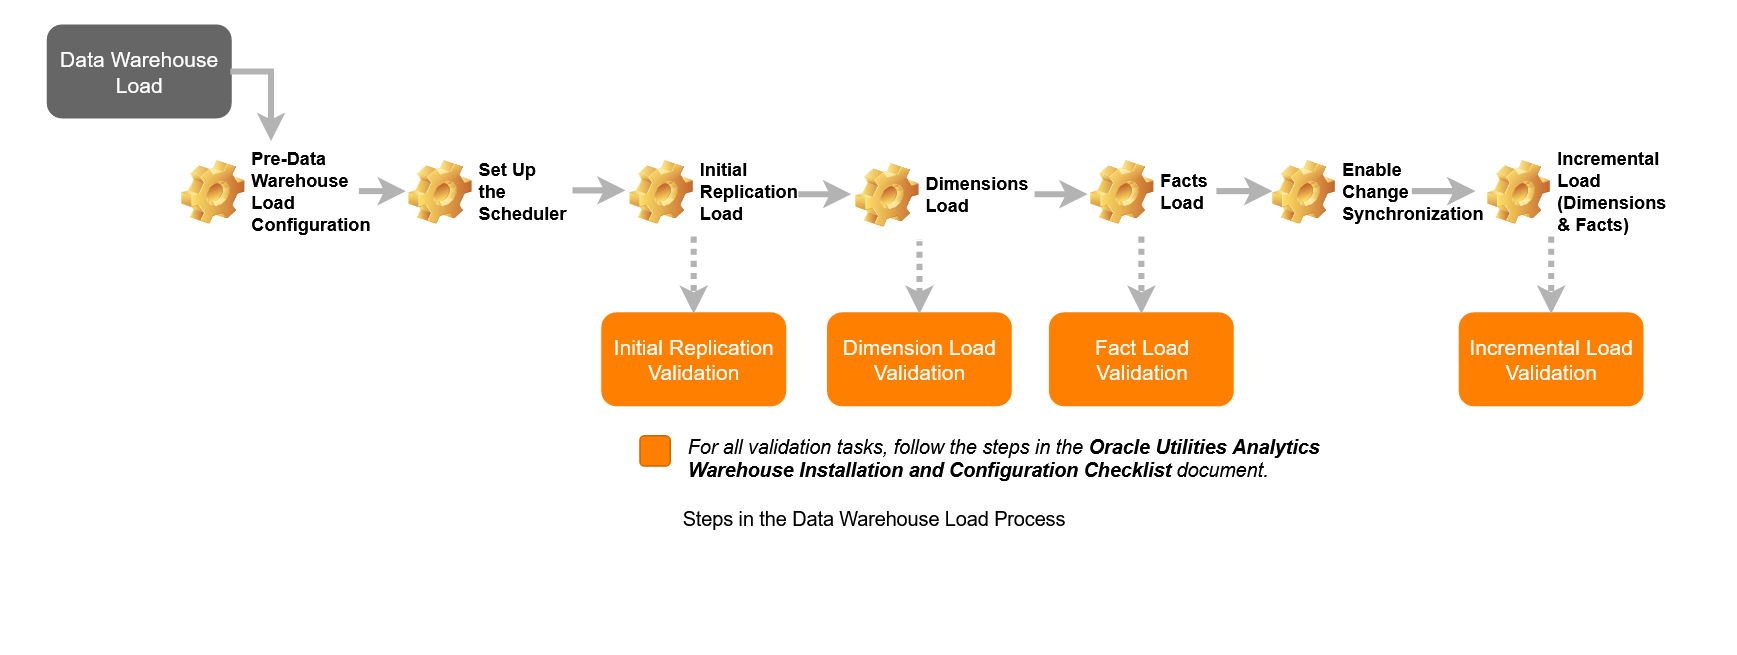 Flowchart illustrating the following loading steps: pre-load configuration, set up scheduler, initial replication load, load dimensions, load facts, enable change sync, incremental load. Initial replication, dimensions, facts, and incremental loads require validation tasks.